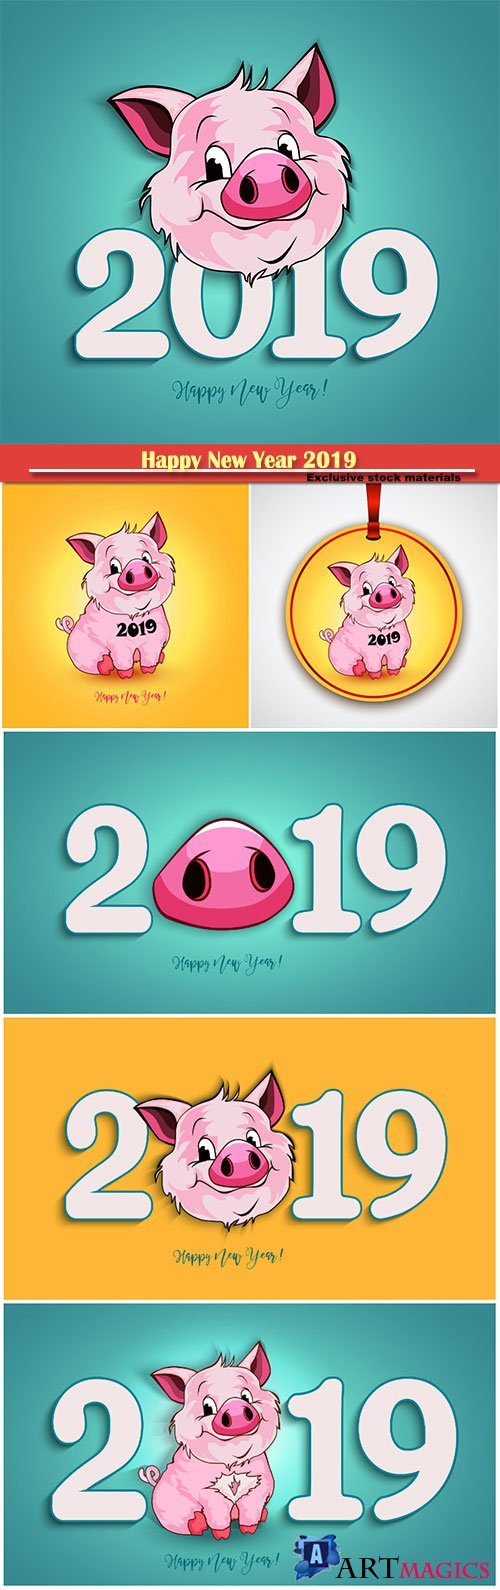 Happy New Year 2019 funny card design with cartoon pigs